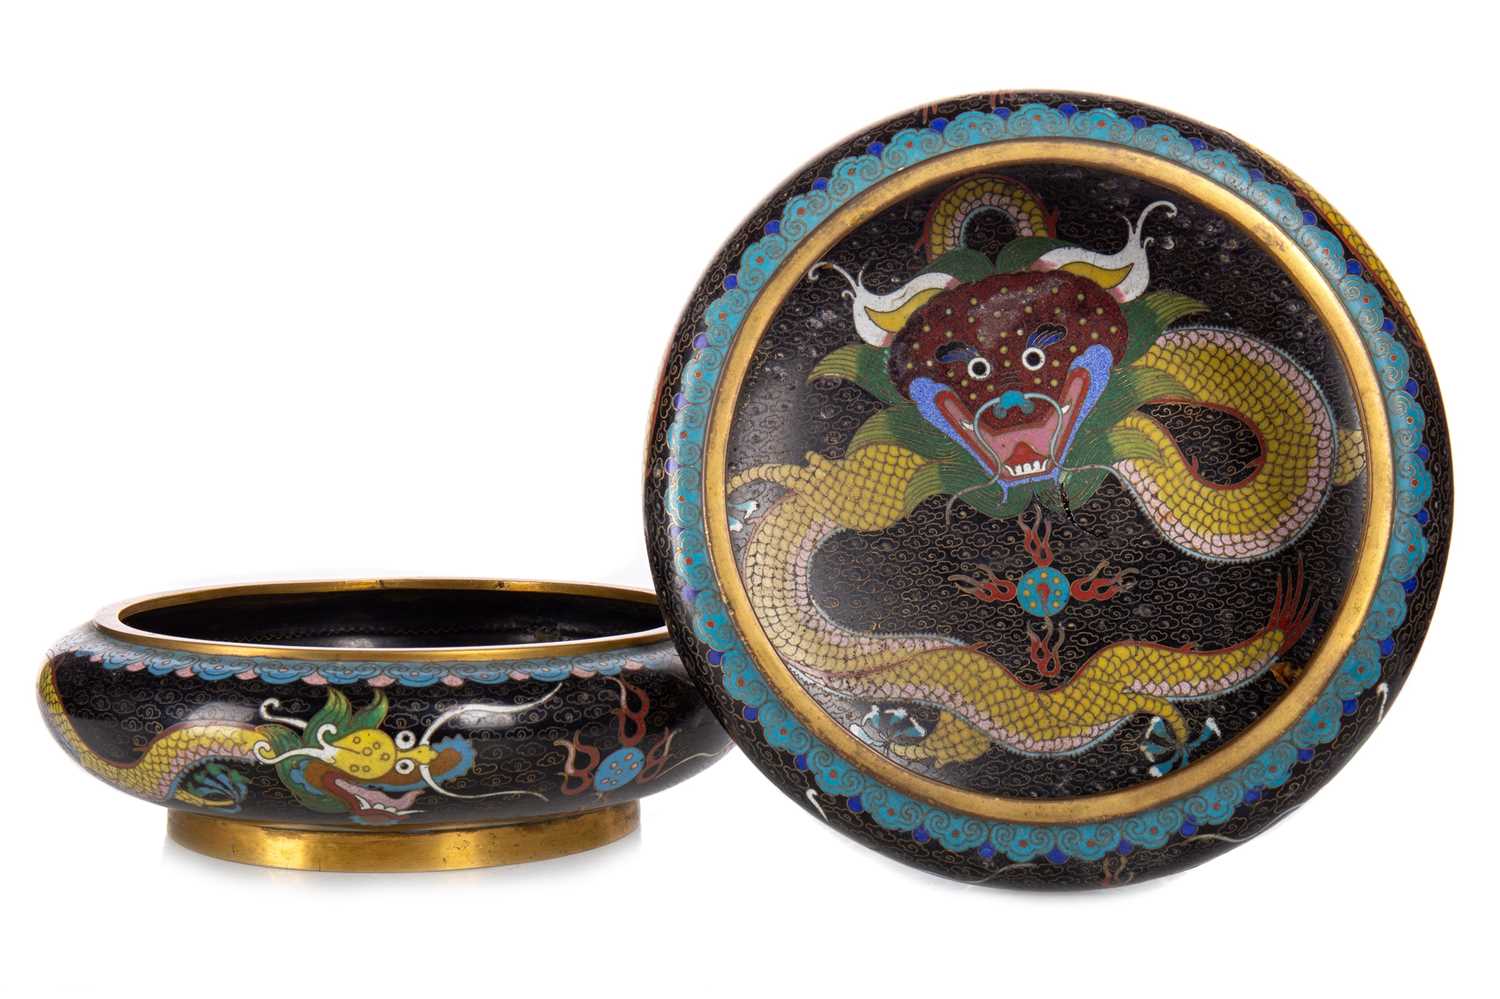 PAIR OF CHINESE CLOISONNE CIRCULAR BOWLS, LATE 19TH CENTURY